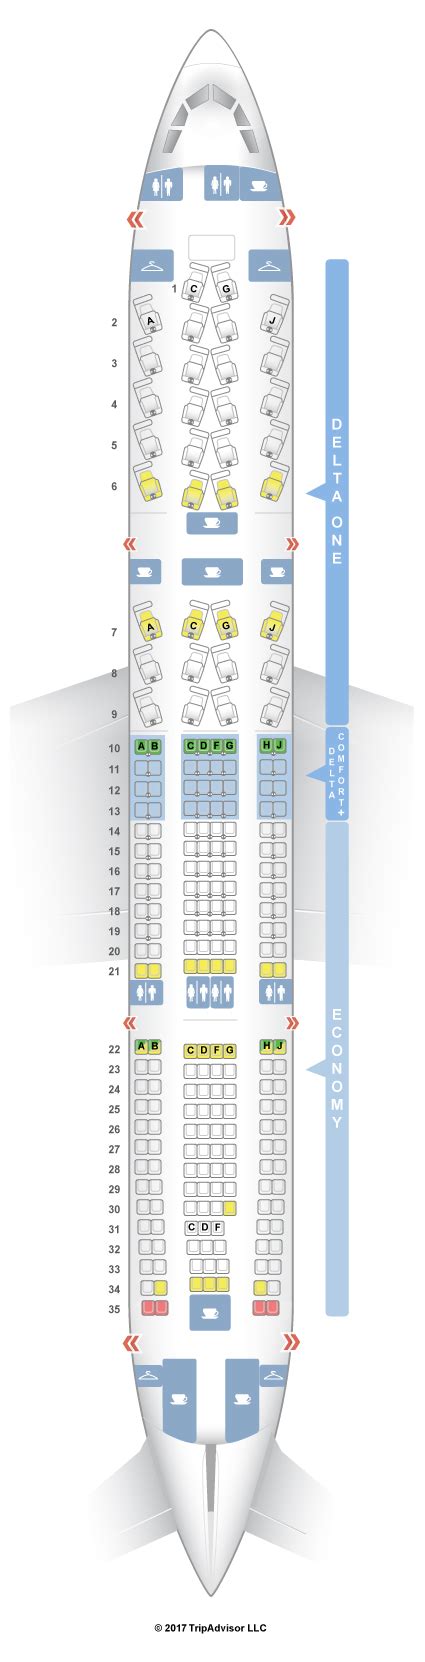 Delta a330 200 seat map. Azul flies their Airbus A330-200 primarily on long-haul routes. Service aboard features two classes - Azul Xtra Business Class and Economy. Economy Xtra is available which provides the passenger with added legroom for an extra fee. All seating features leather seats, individual inflight monitors, and power ports. 